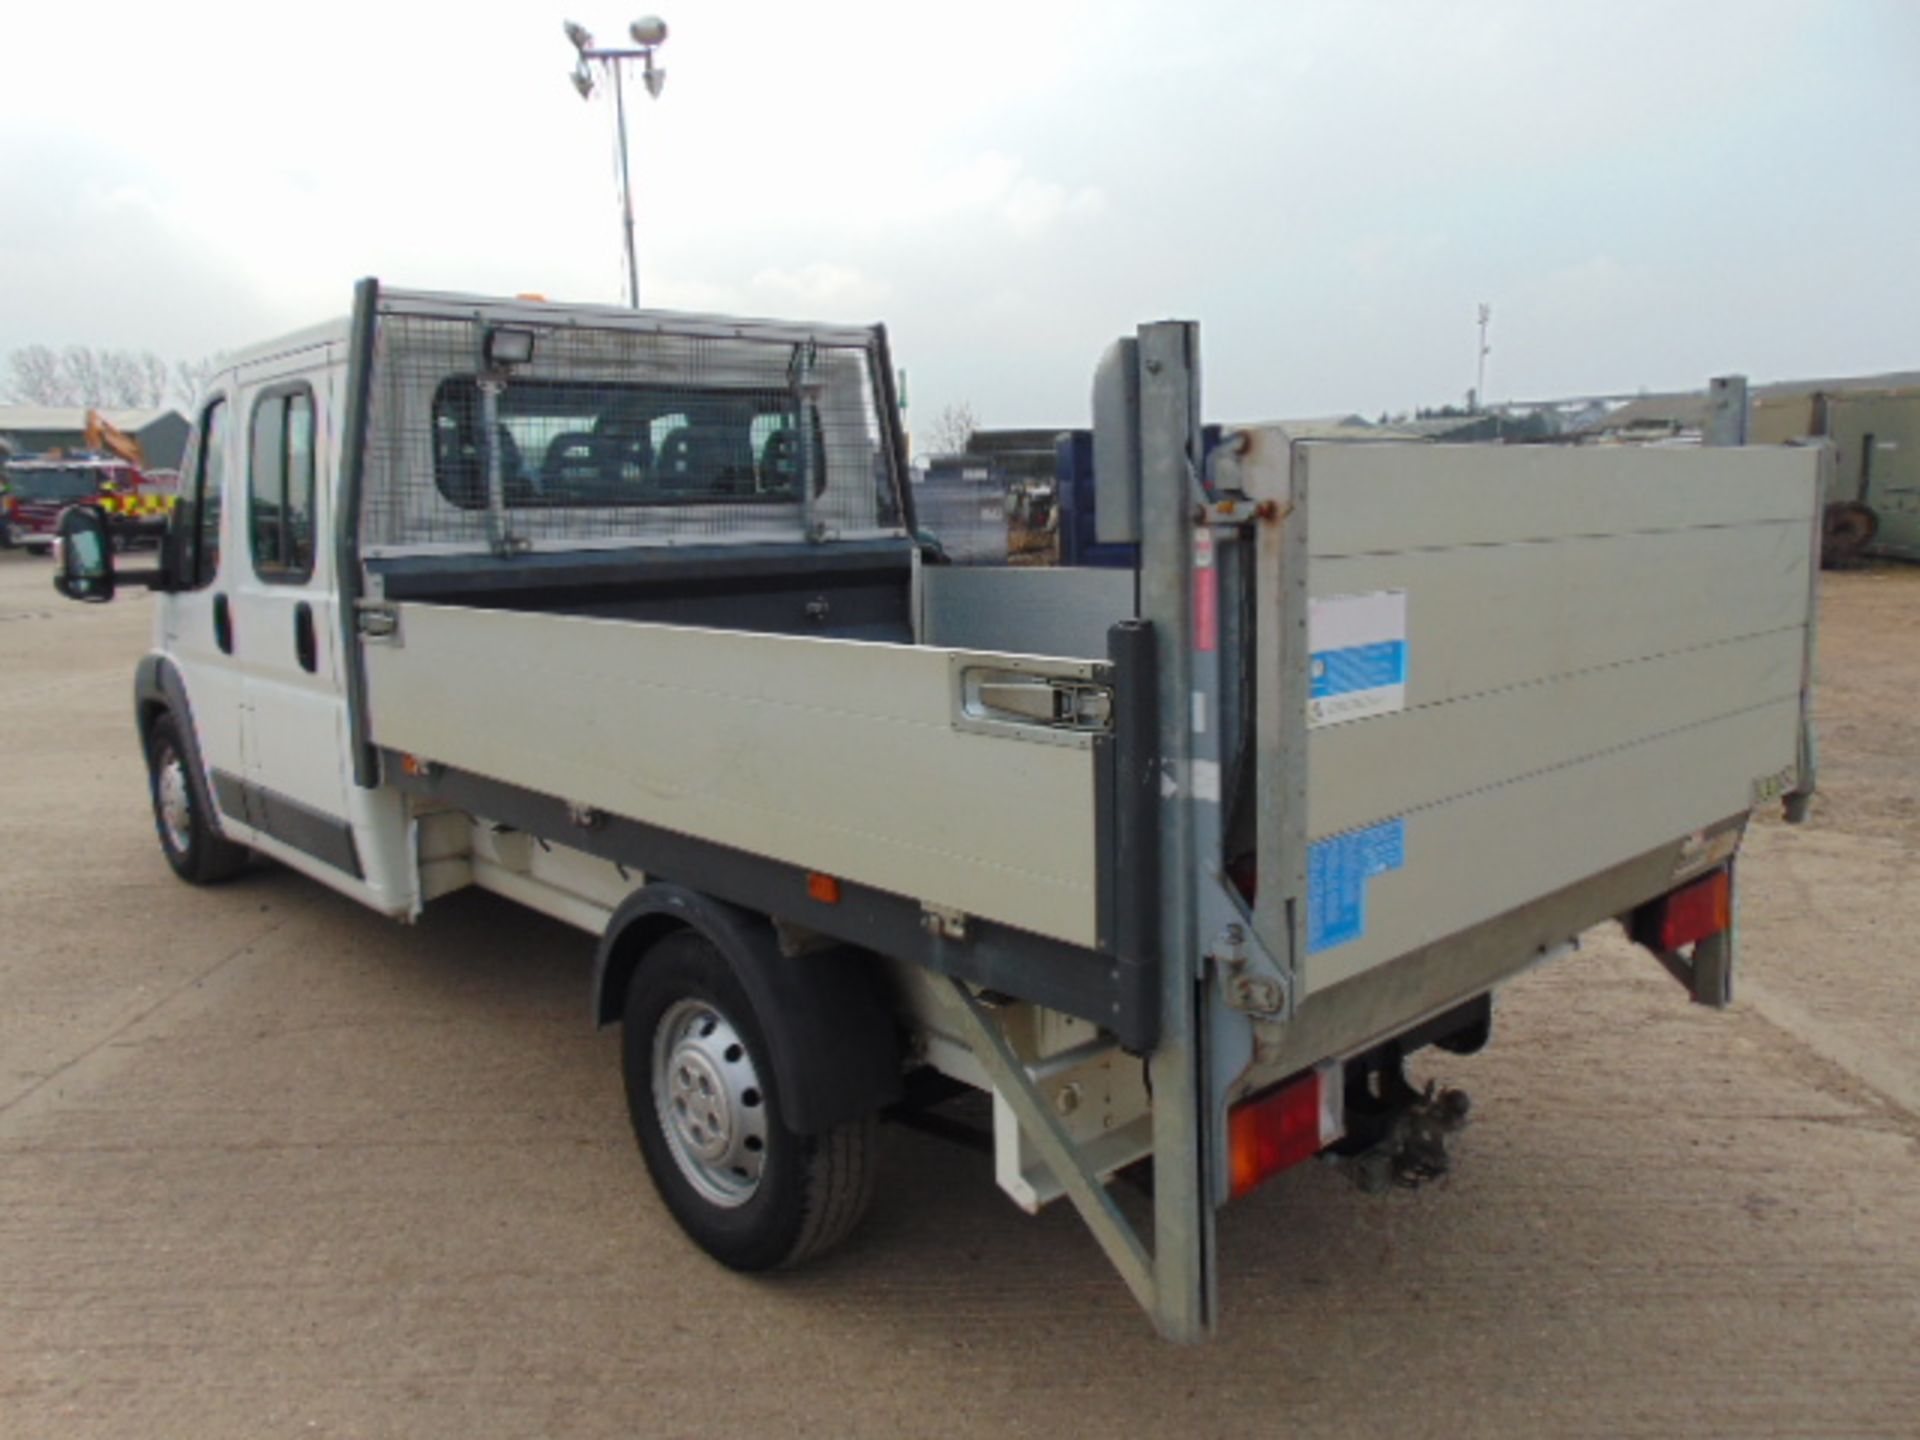 Citroen Relay 7 Seater Double Cab Dropside Pickup with 500kg Ratcliff Palfinger Tail Lift - Image 5 of 27